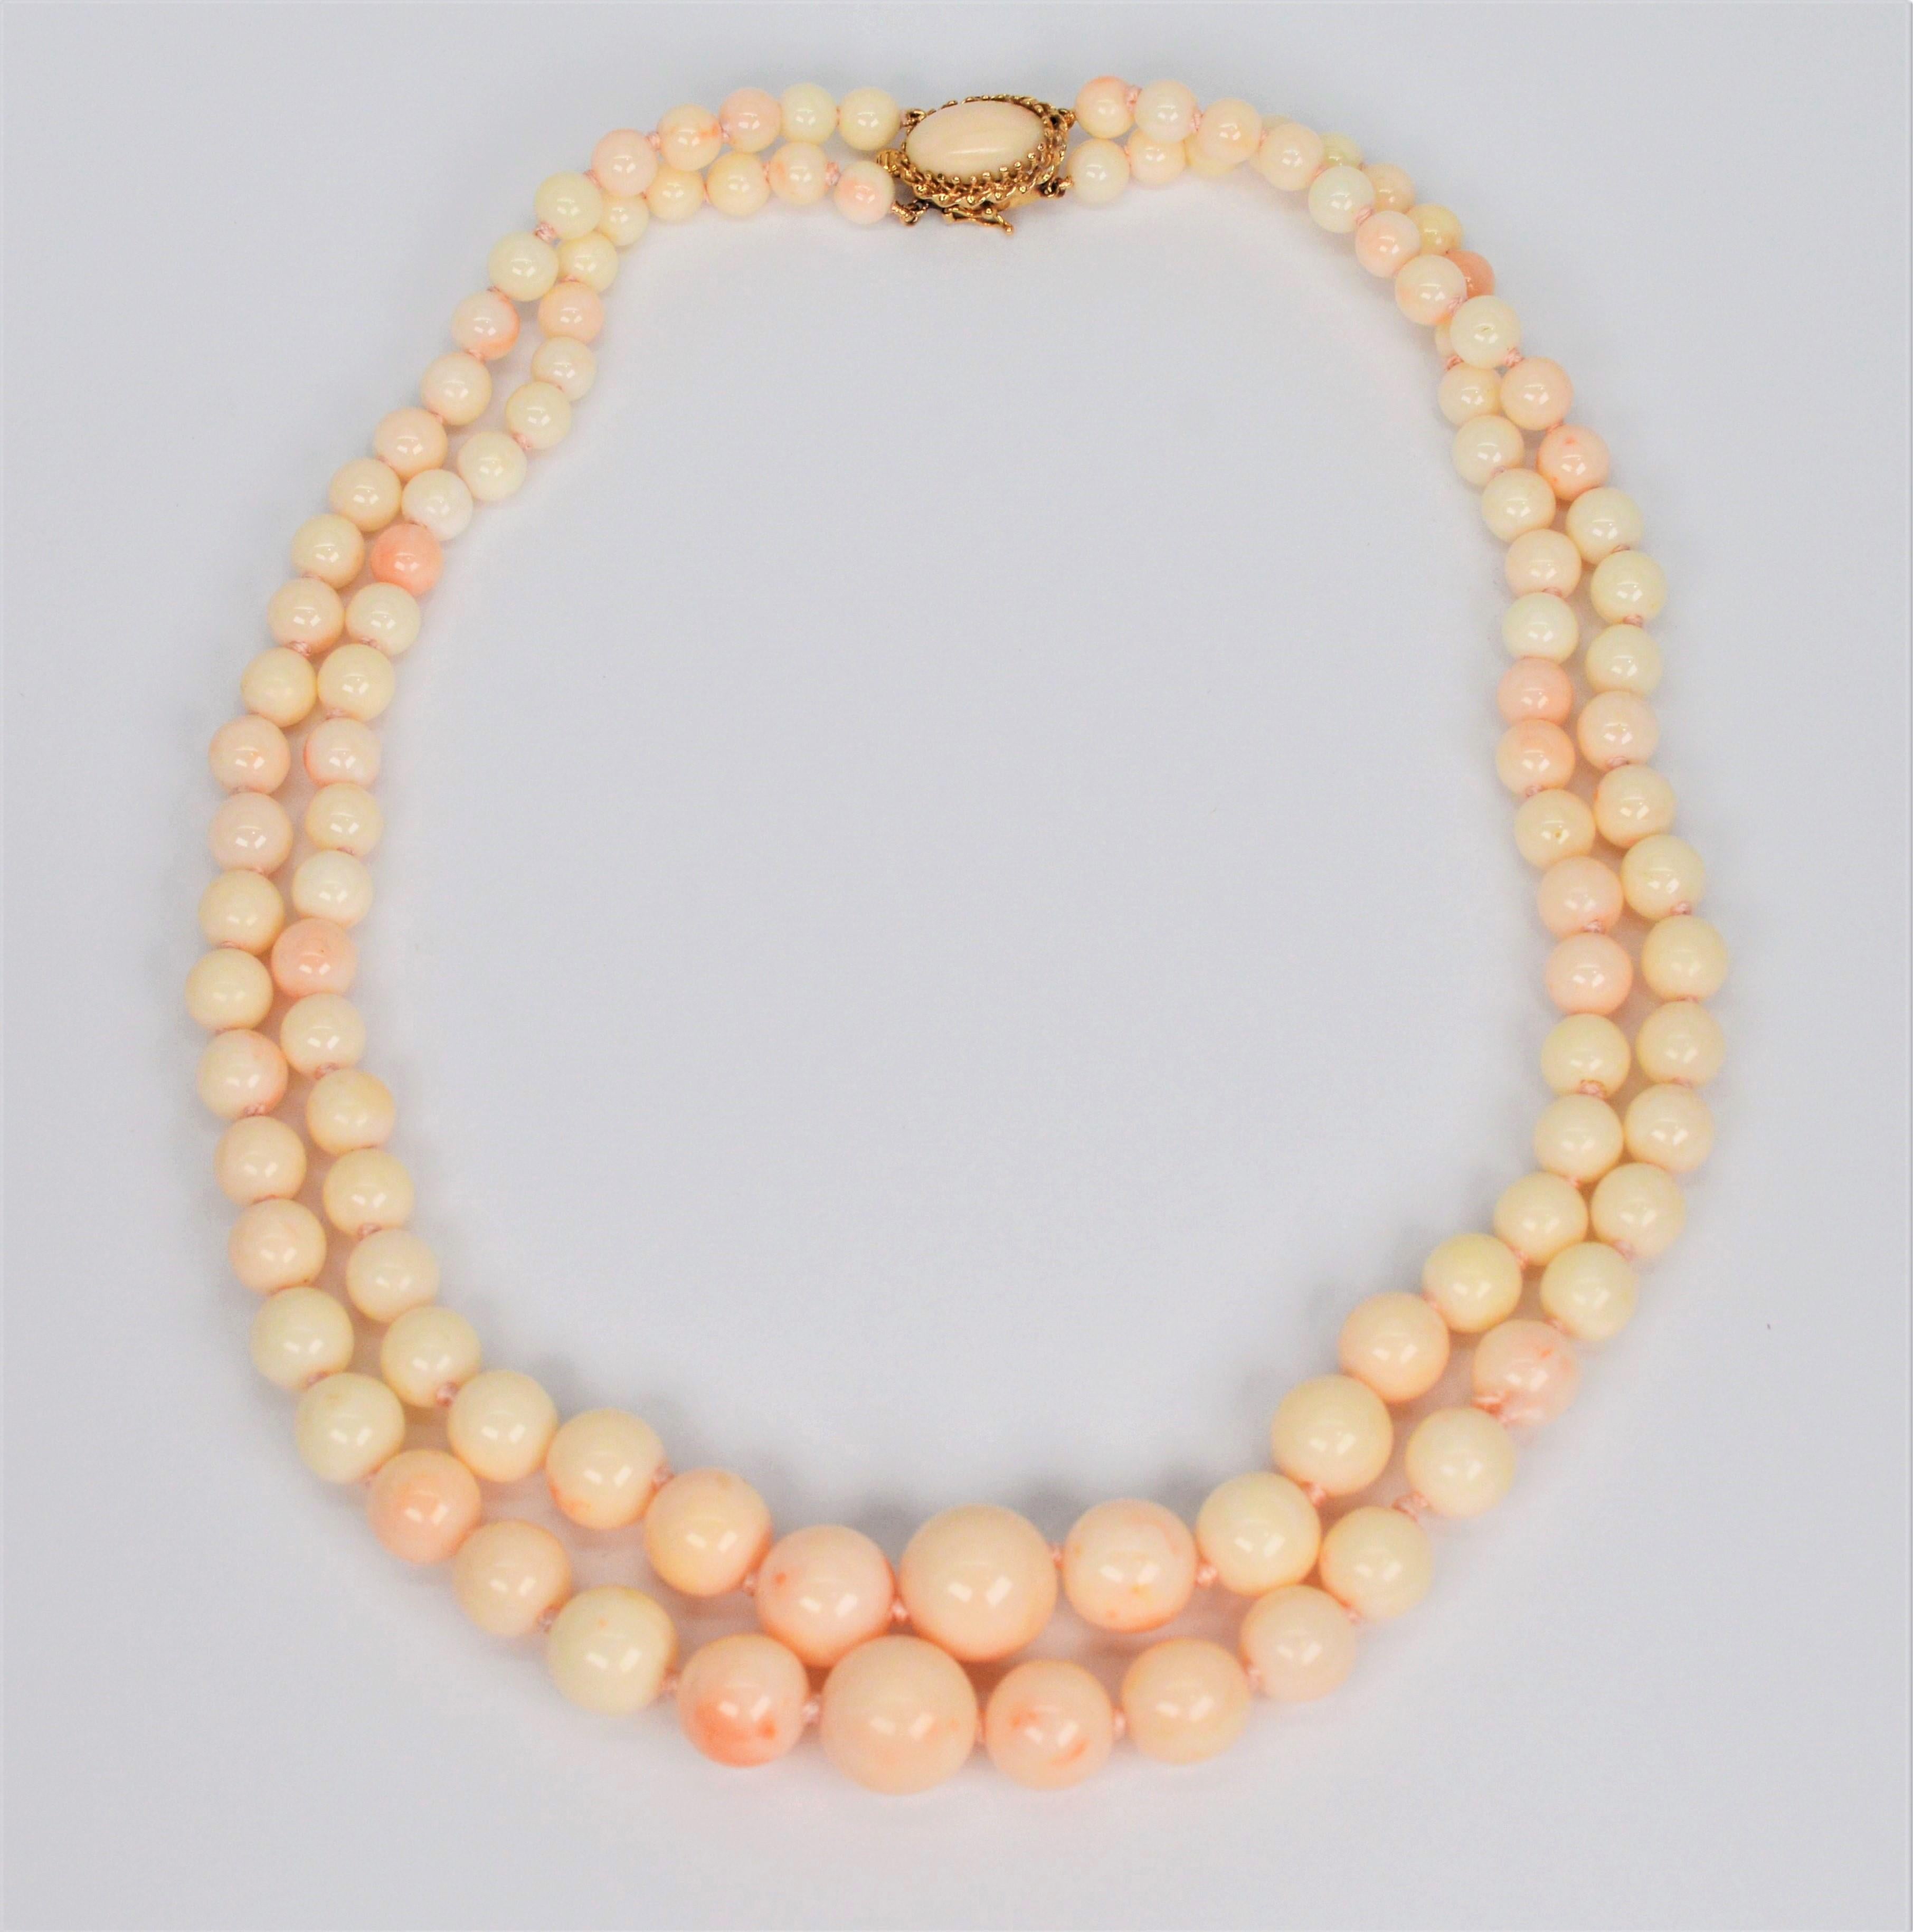 Vintage Blush Coral Bead Double Strand Necklace w 14 Karat Gold Clasp In Excellent Condition For Sale In Mount Kisco, NY